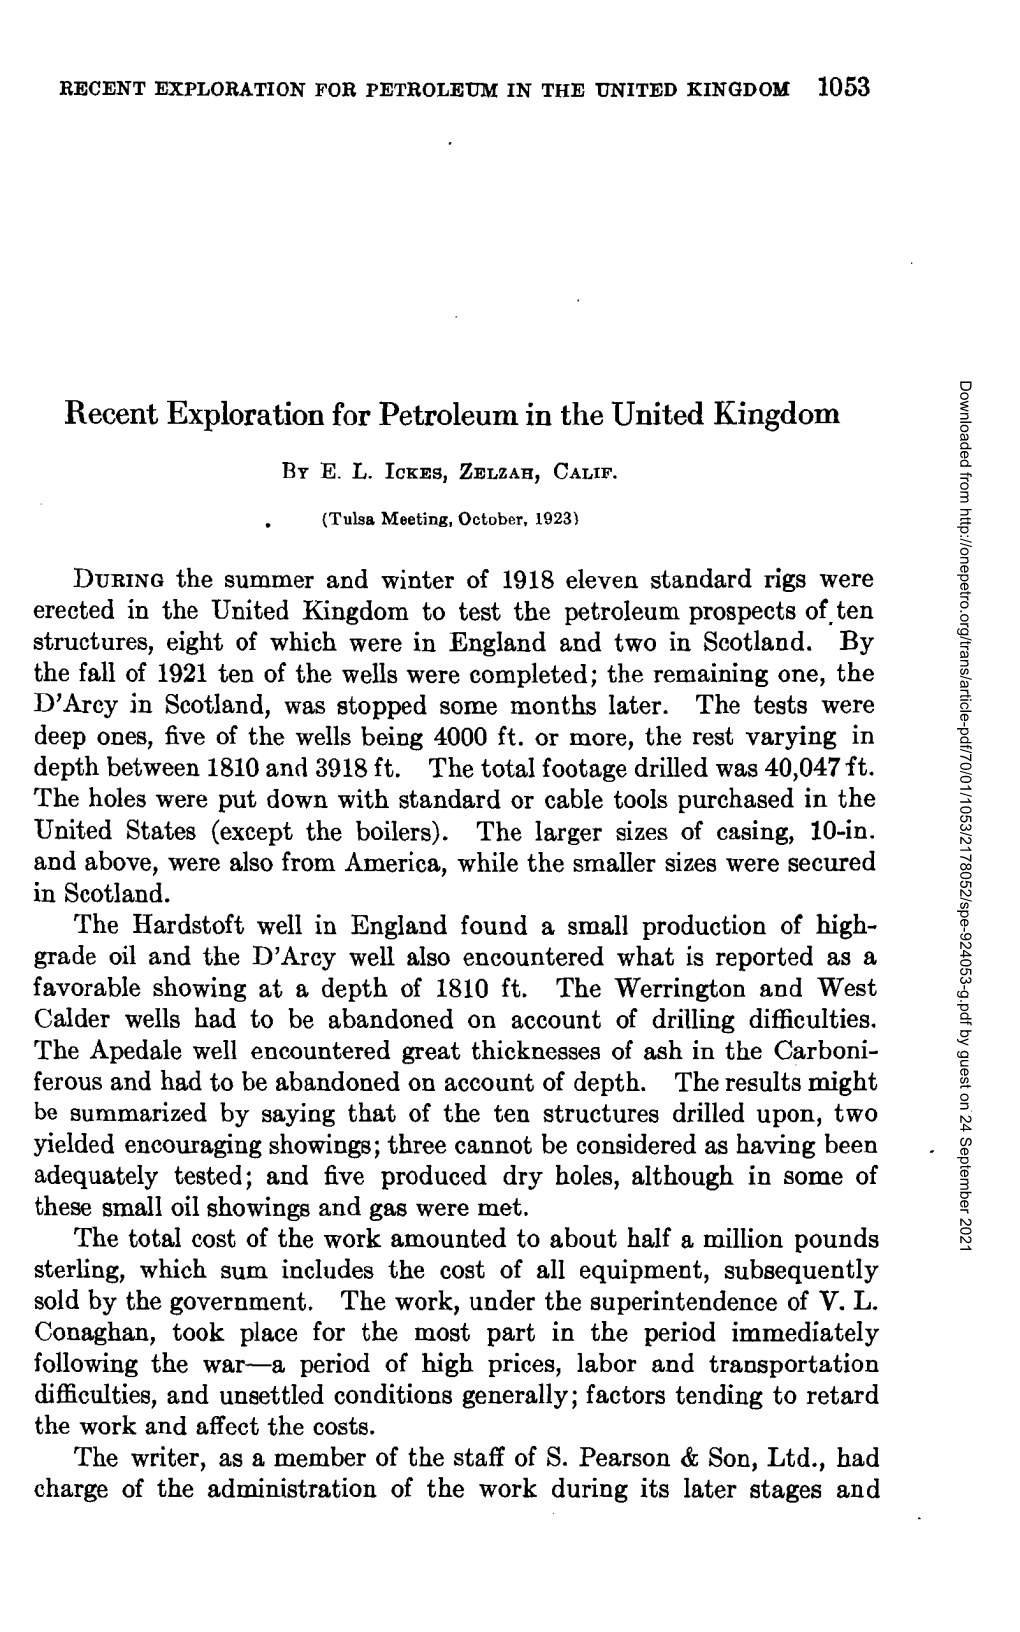 Recent Exploration for Petroleum in the United Kingdom